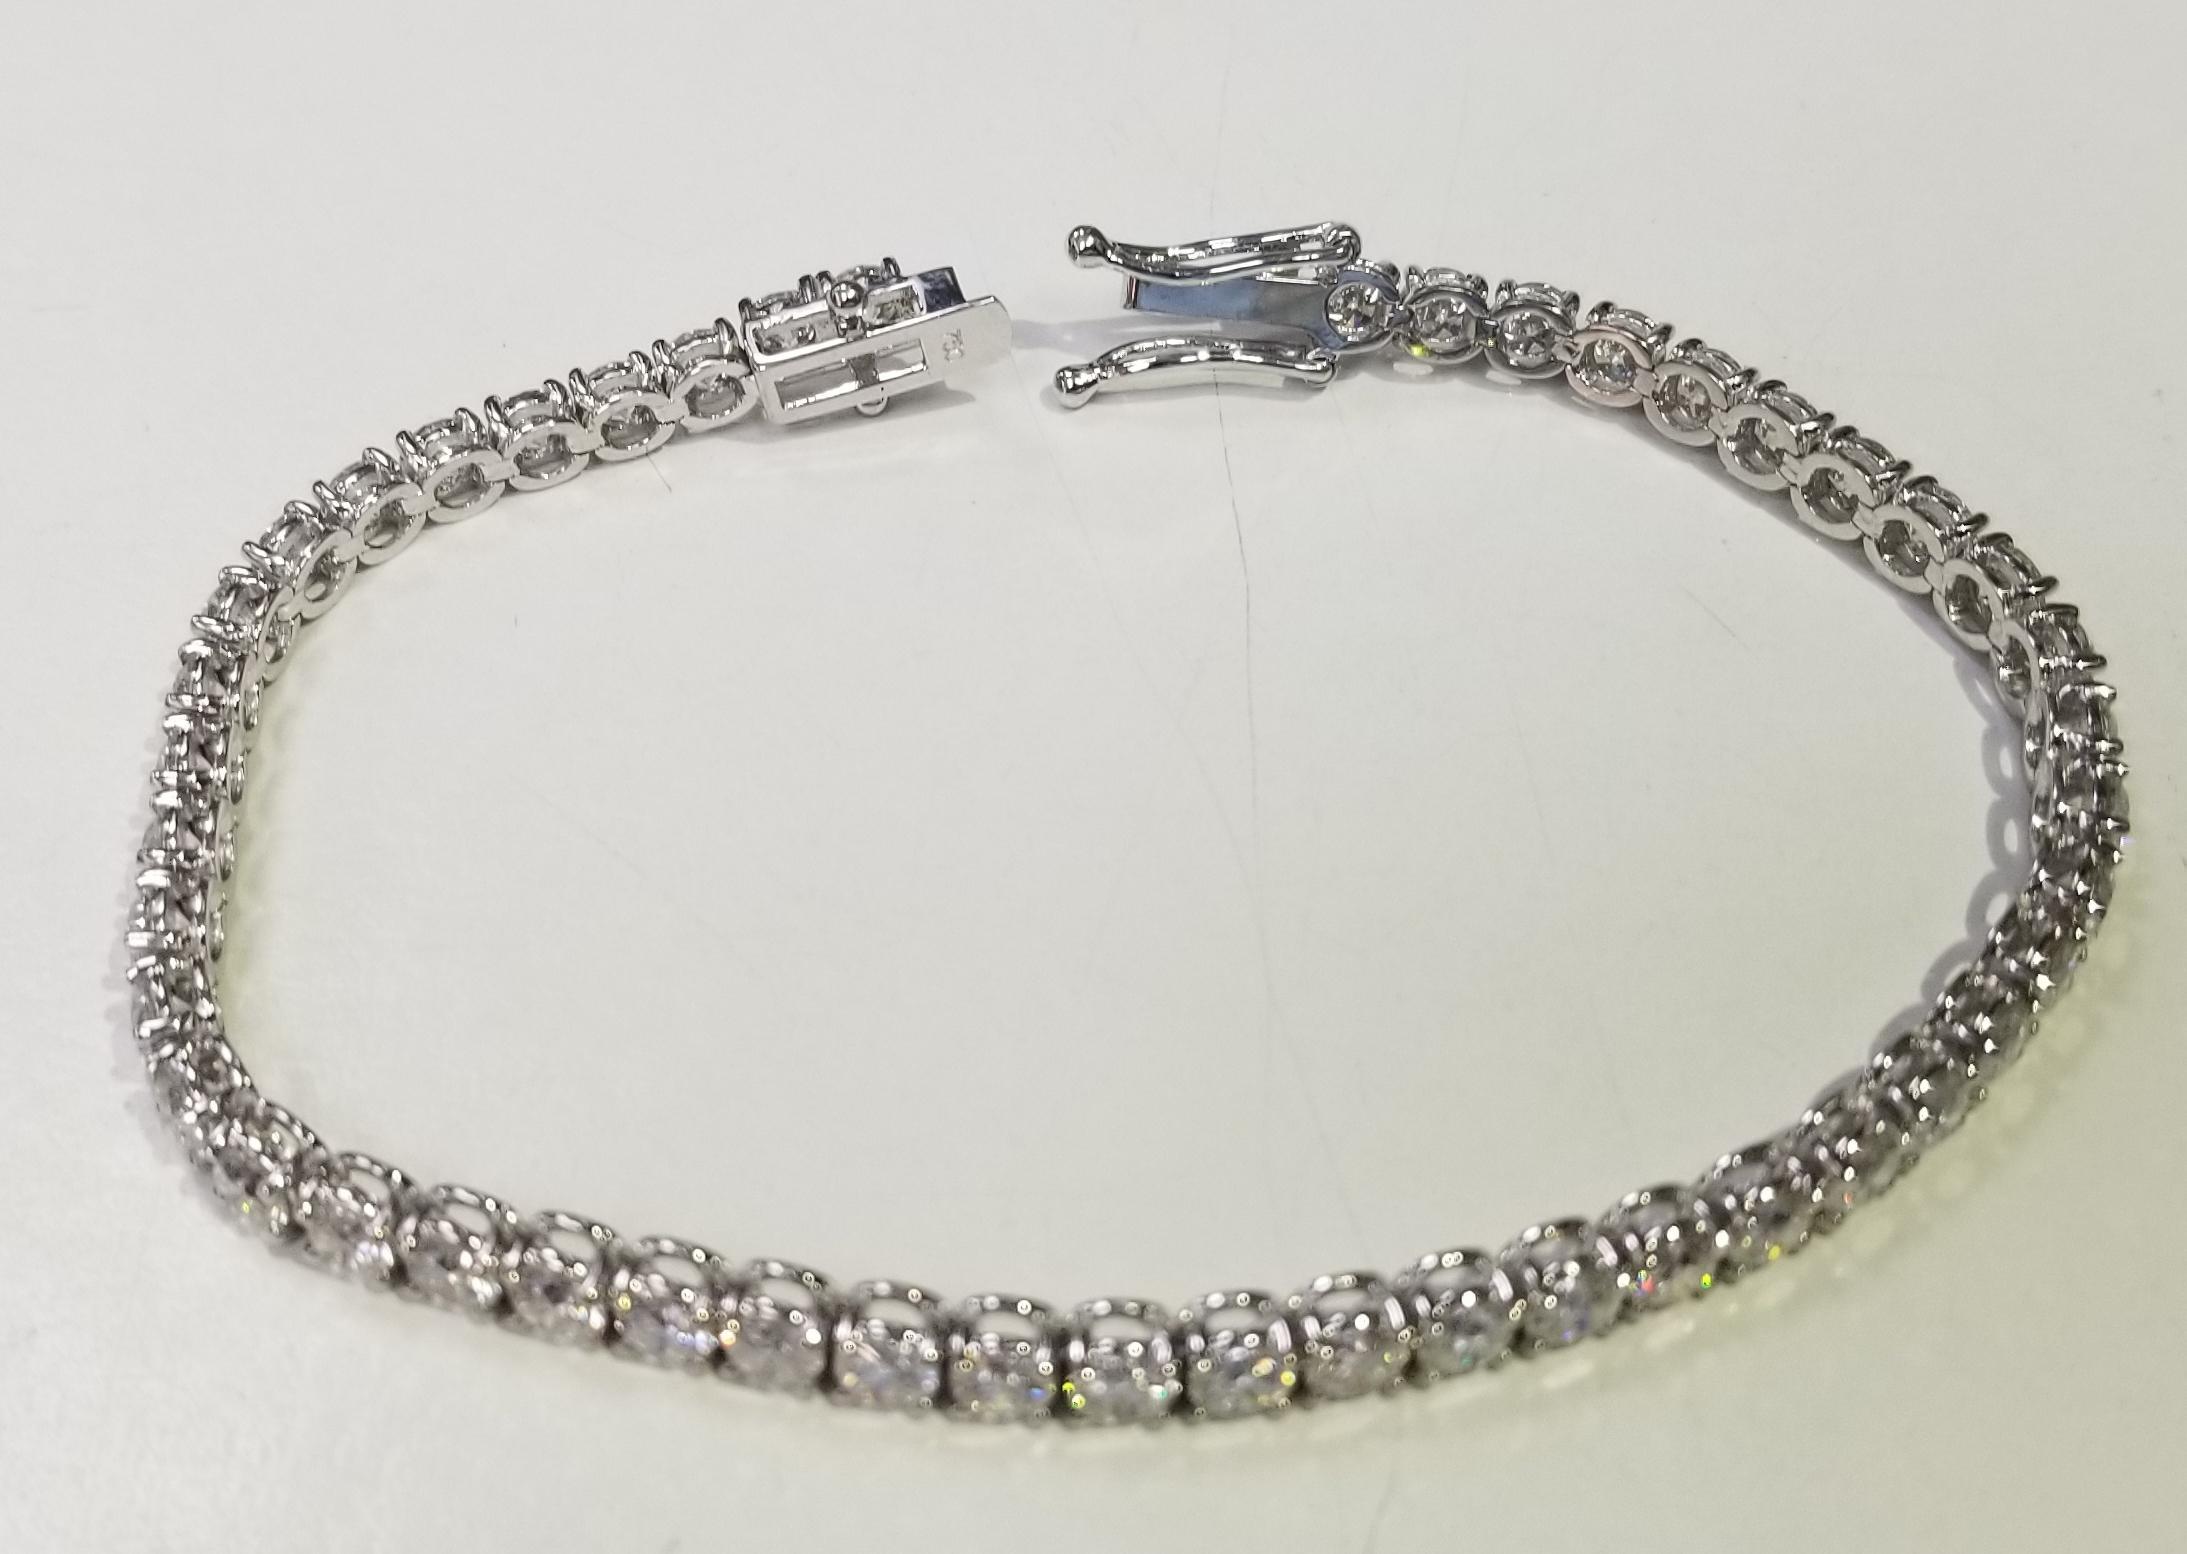 This is very beautiful 18k white gold custom made tennis bracelet with 44 round diamonds color F-G and clarity VS2-SI1 weighing 8.45cts. very fine quality diamonds, bracelet measures 7 inches with clasp and safety.
Specifications:
main stone: ROUND